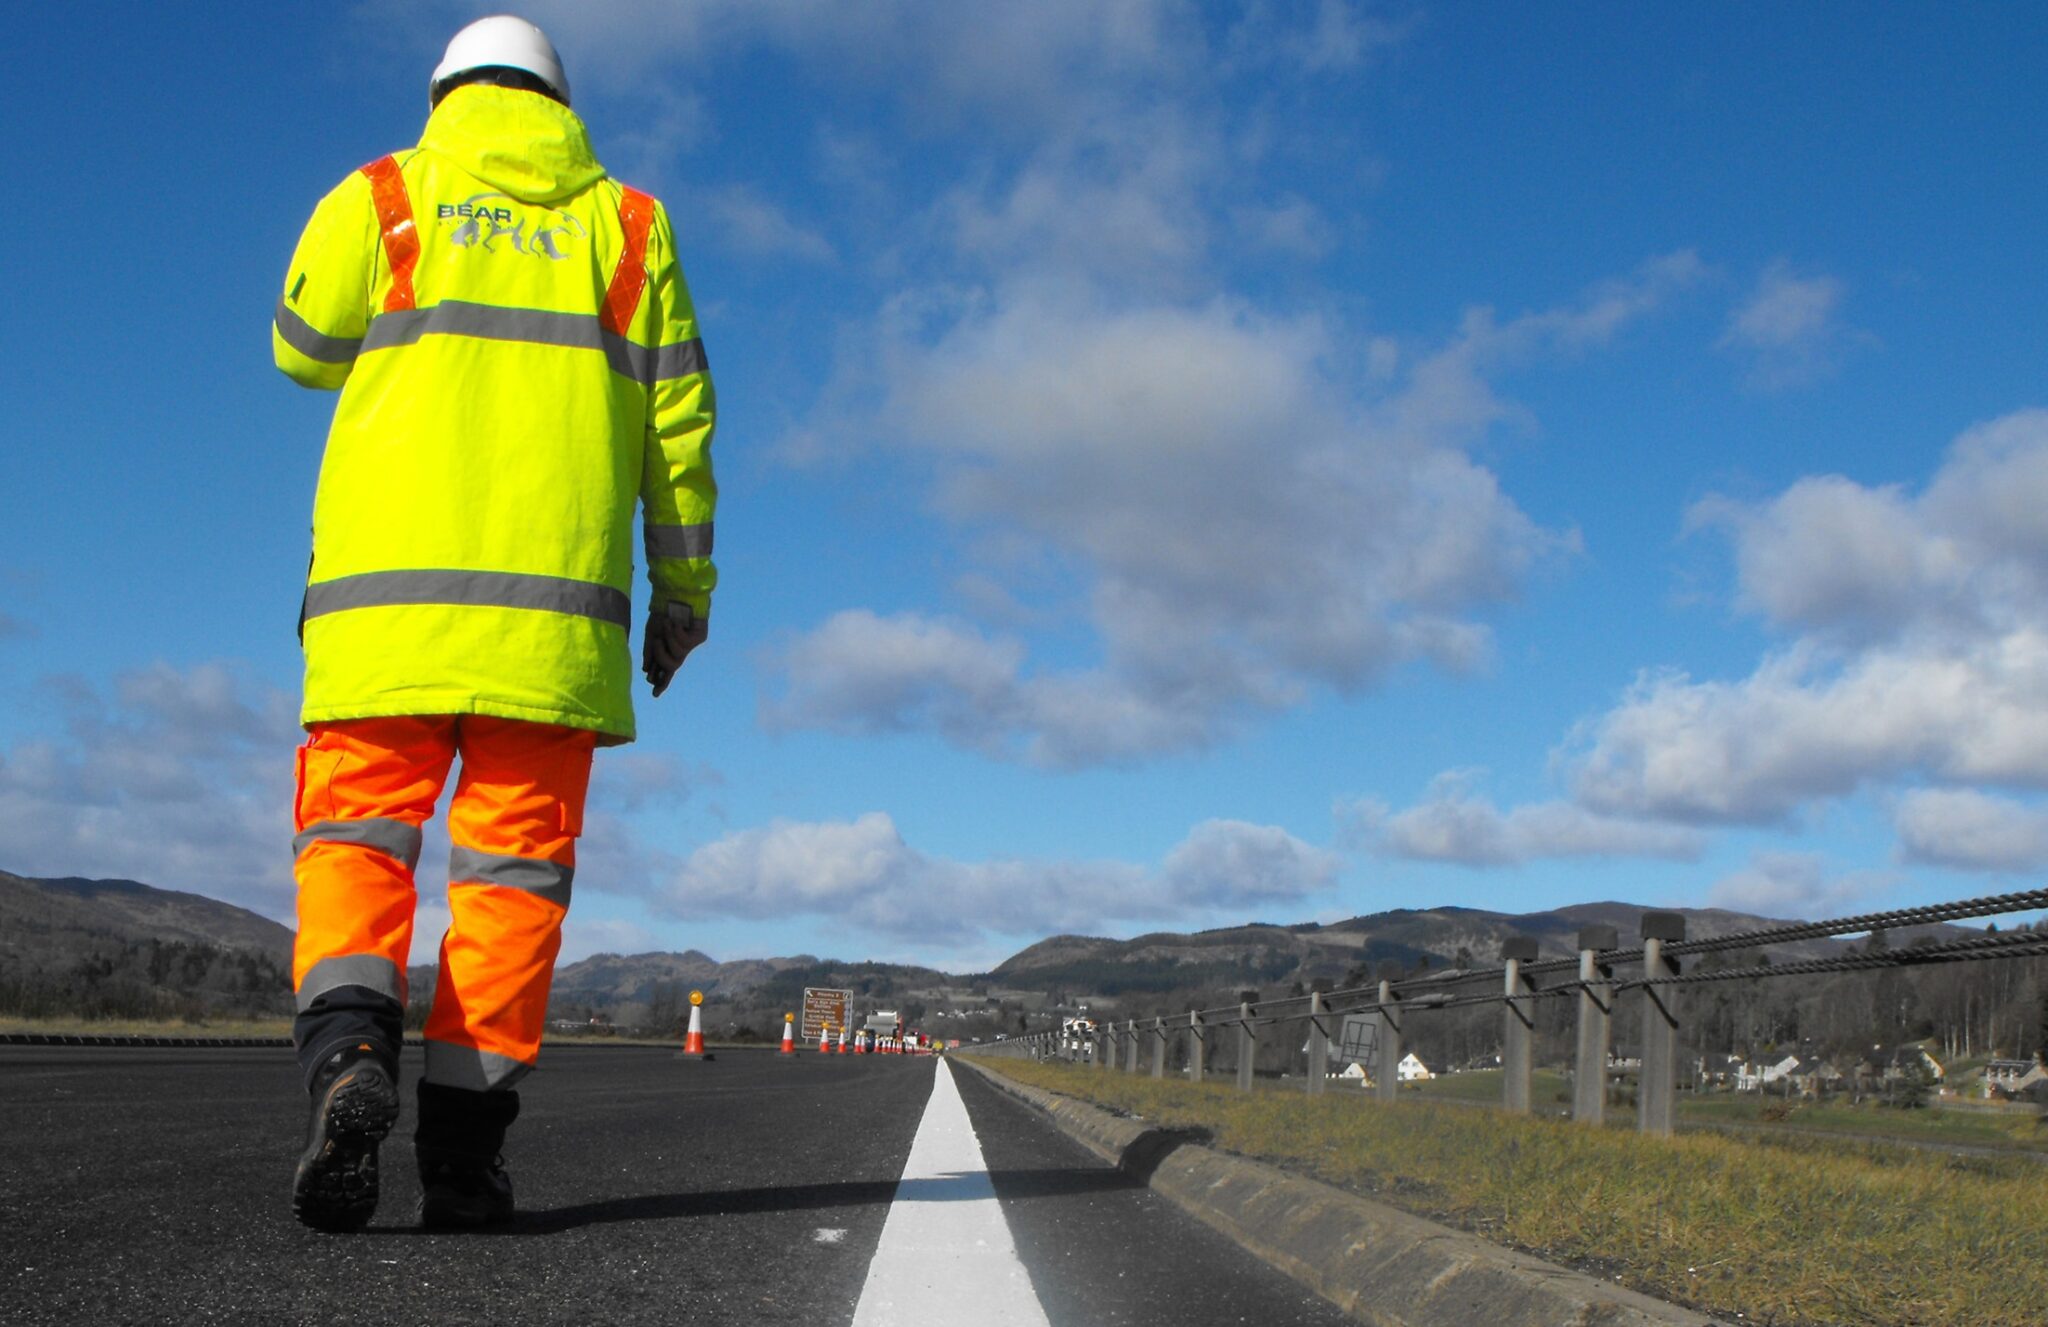 OVERNIGHT RESURFACING ON THE A9 BALLINLUIG SOUTHBOUND JUNCTION